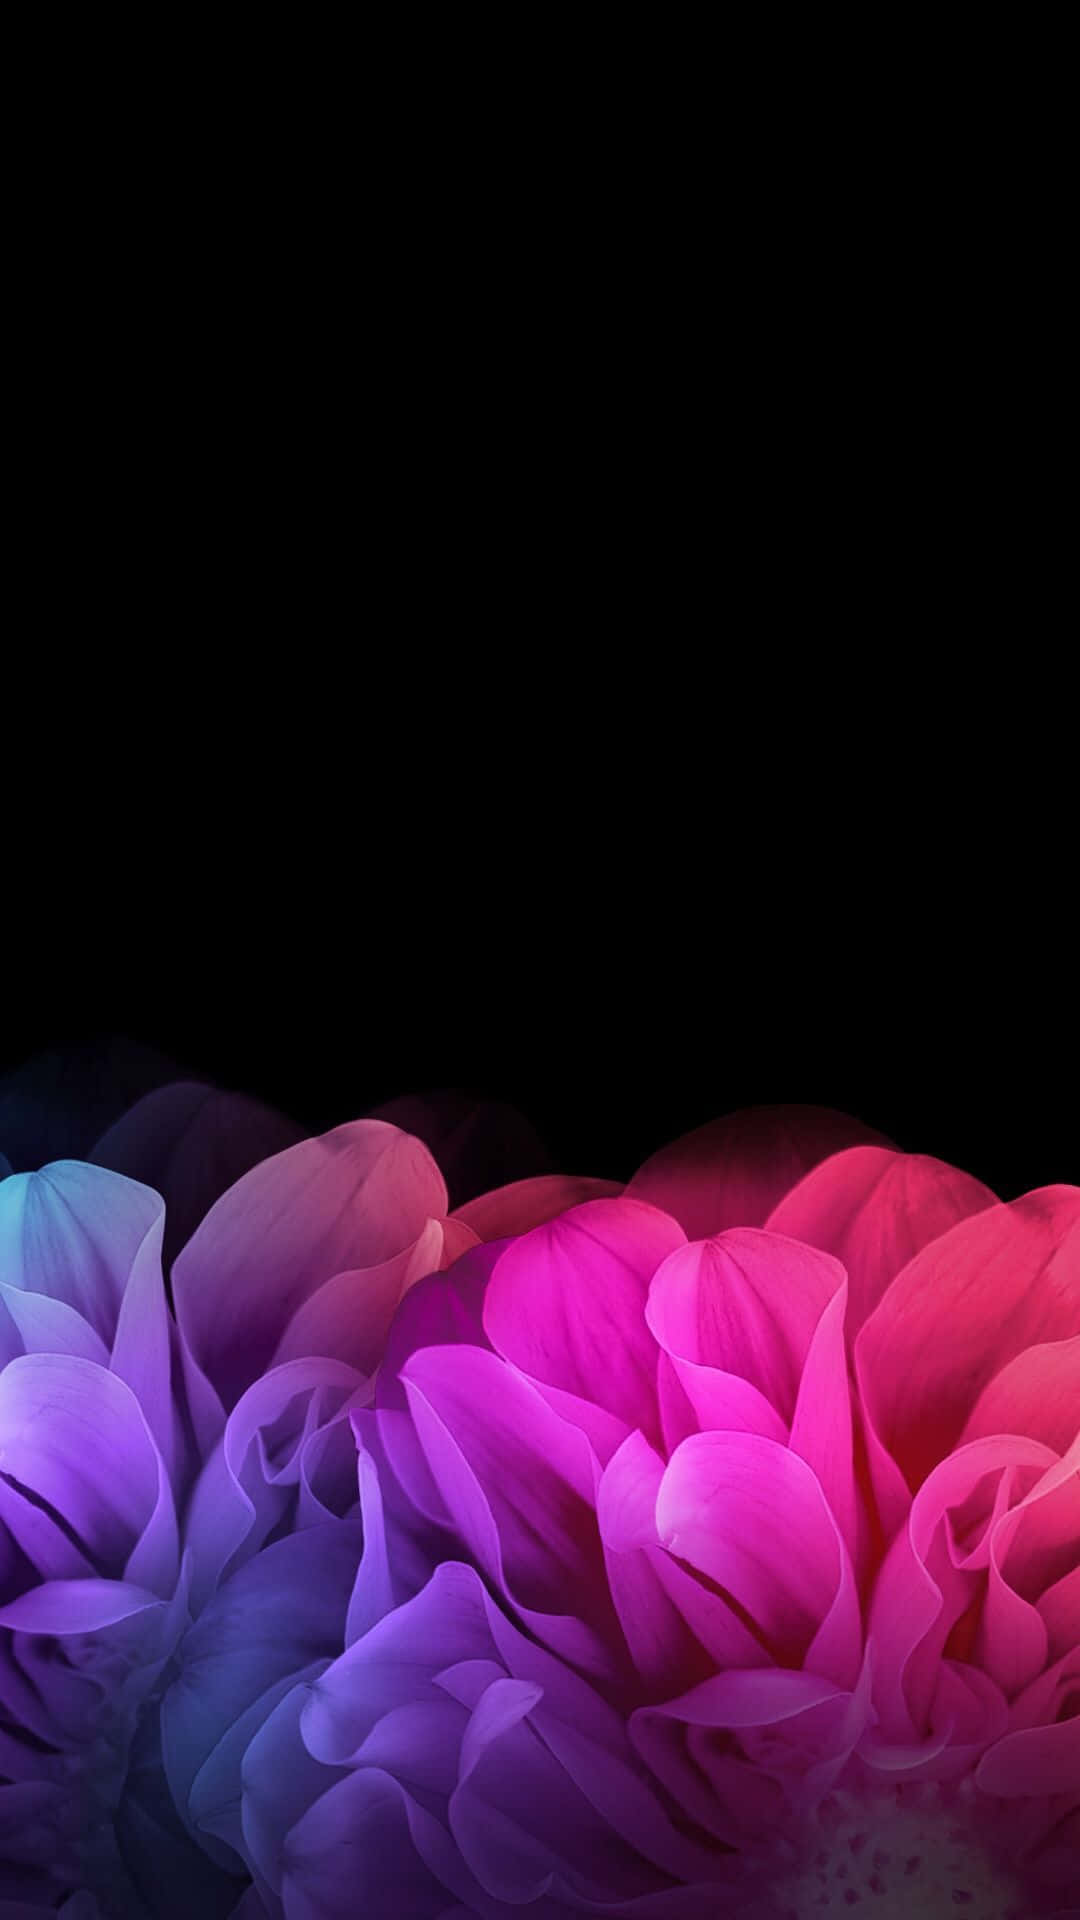 Embrace The Beauty Of Black And Pink Floral Wallpaper